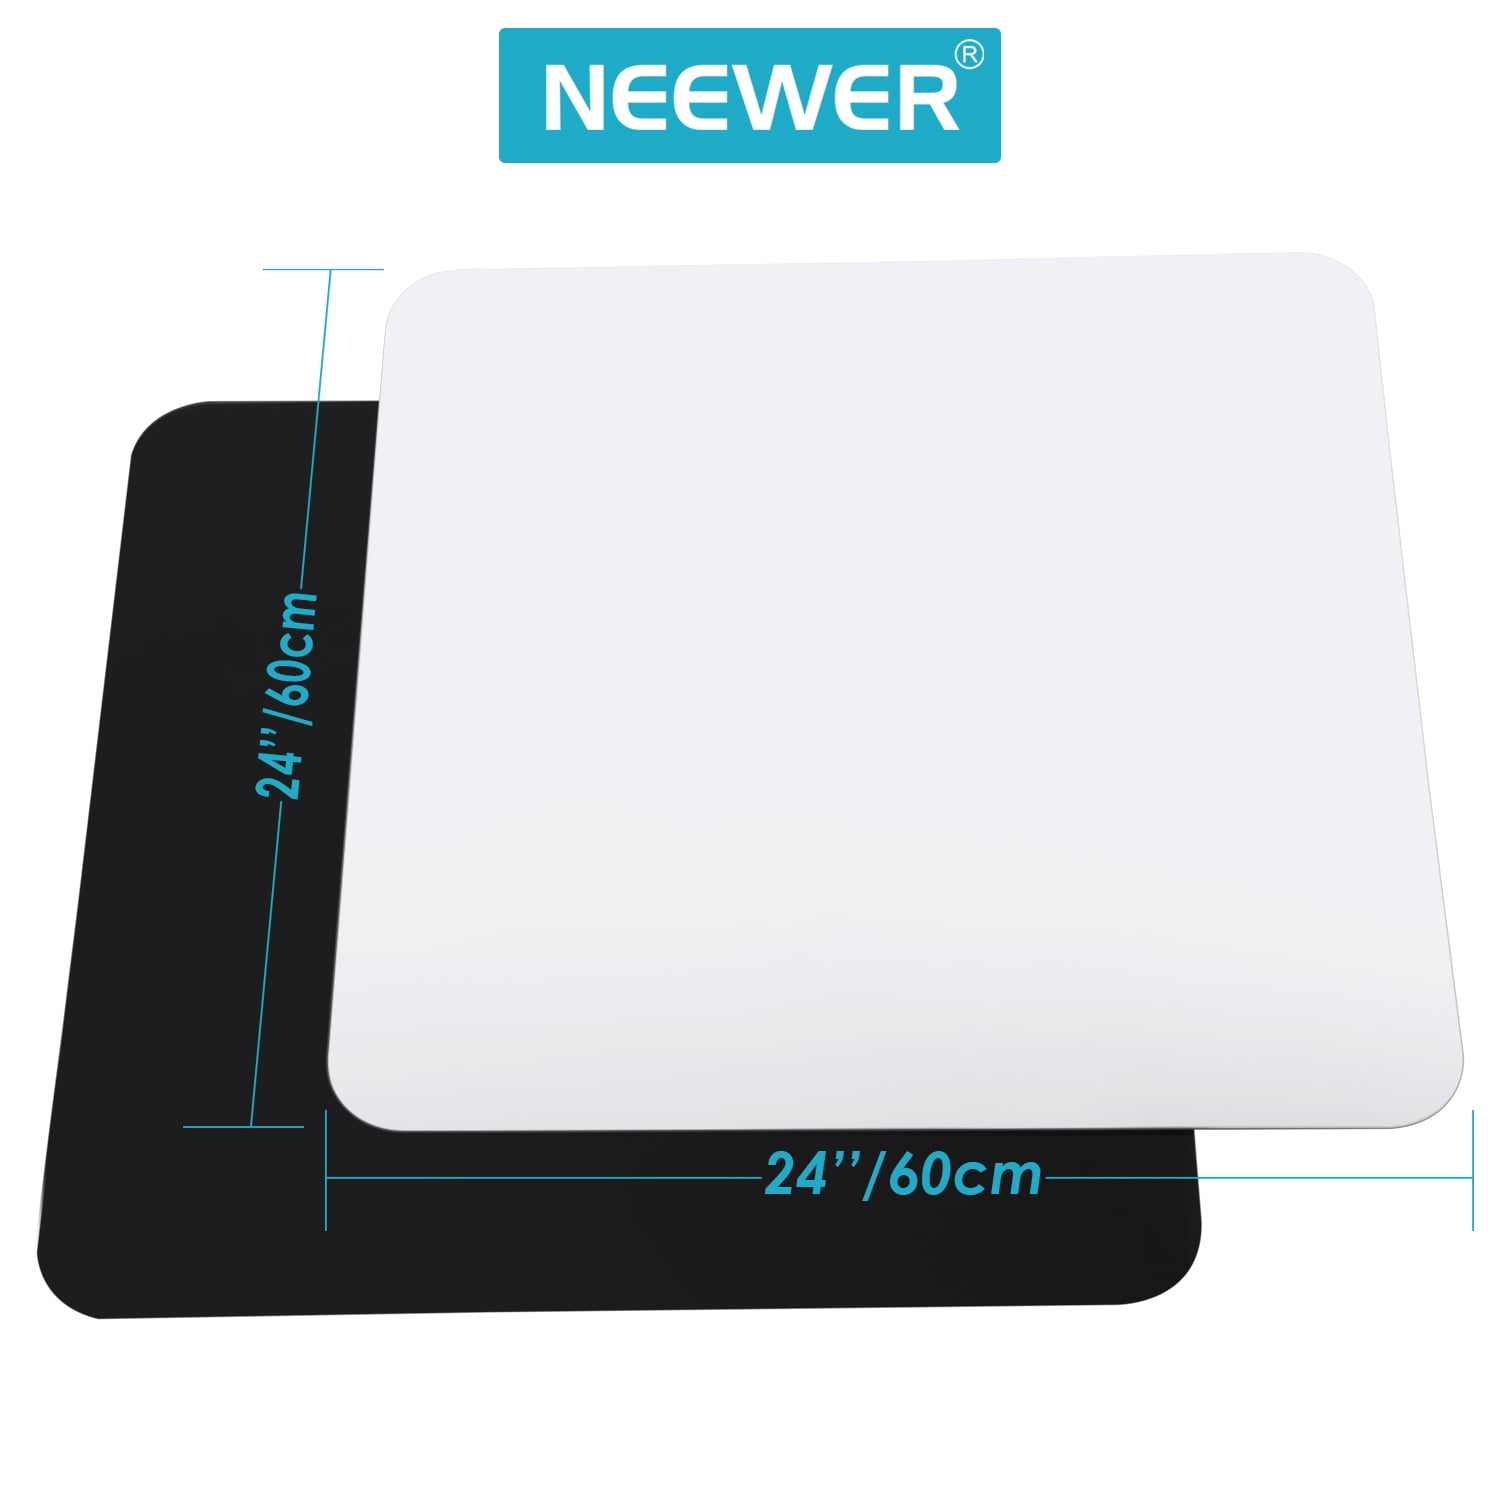 Set of 2 60x60cm Black & White Reflective Acrylic Boards for Product Photography 